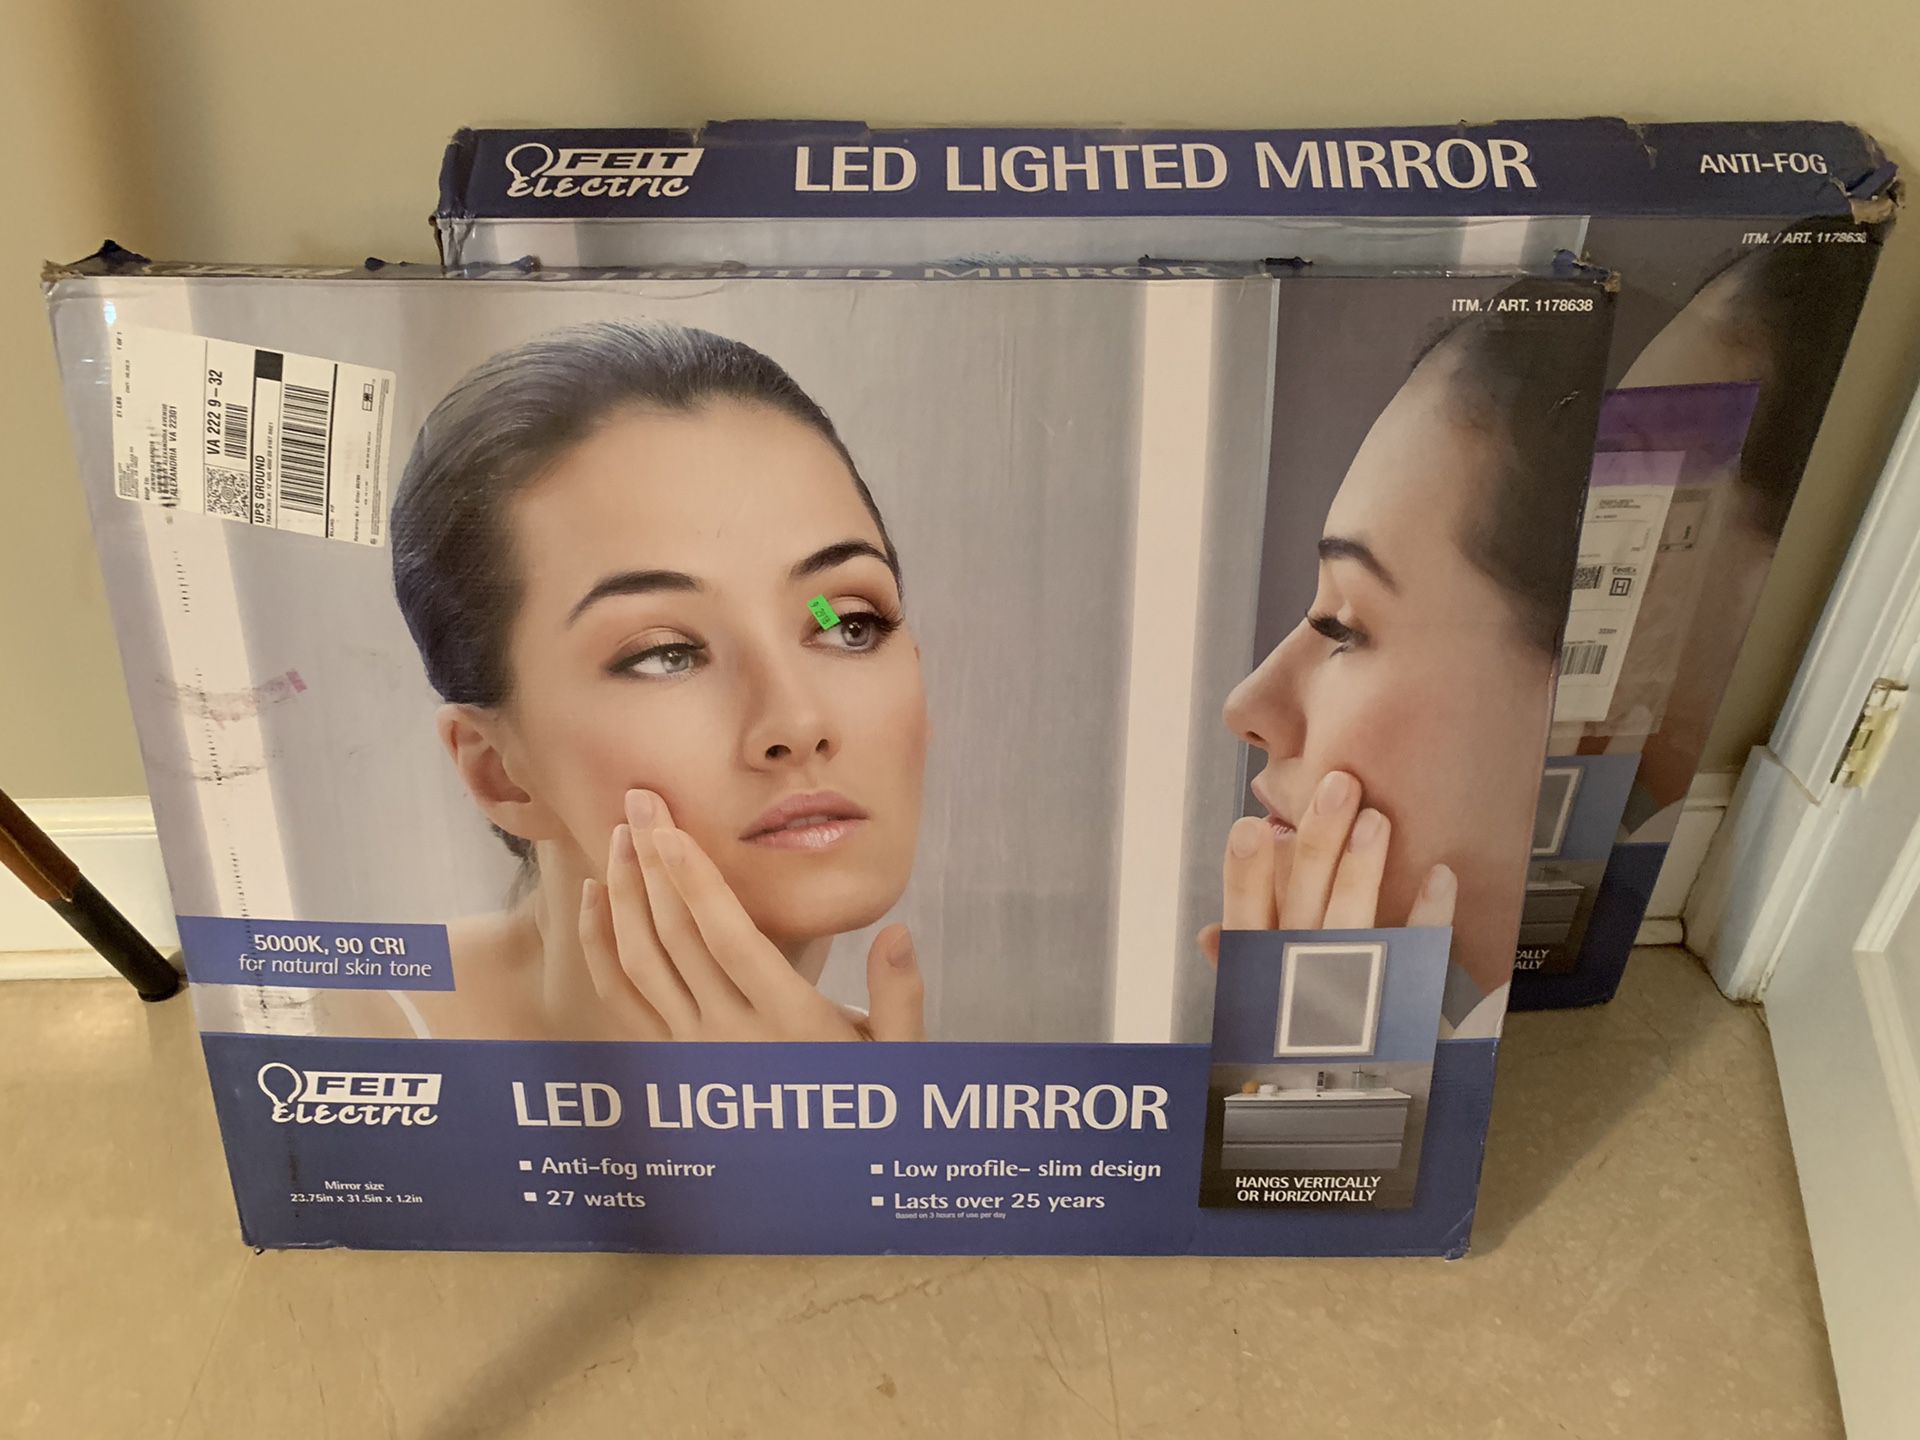 2 LED Bathroom Vanity Mirrors NEW in Box Feit Electric